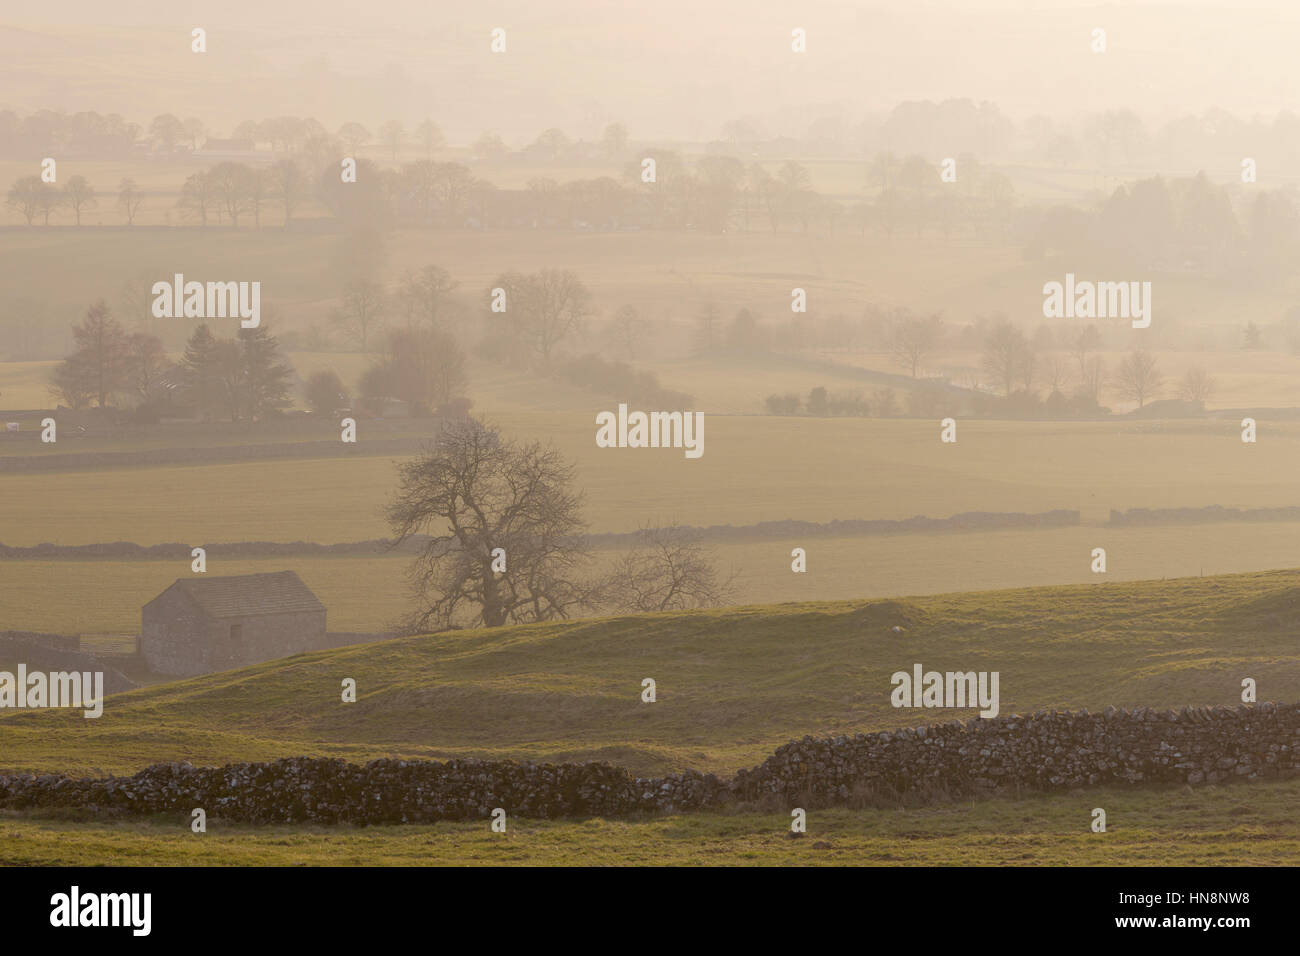 Misty view over the dry stone walls and fields of Wharfedale from the Dales Way Footpath near Grassington, Wharfedale, Yorkshire Dales National Park,  Stock Photo